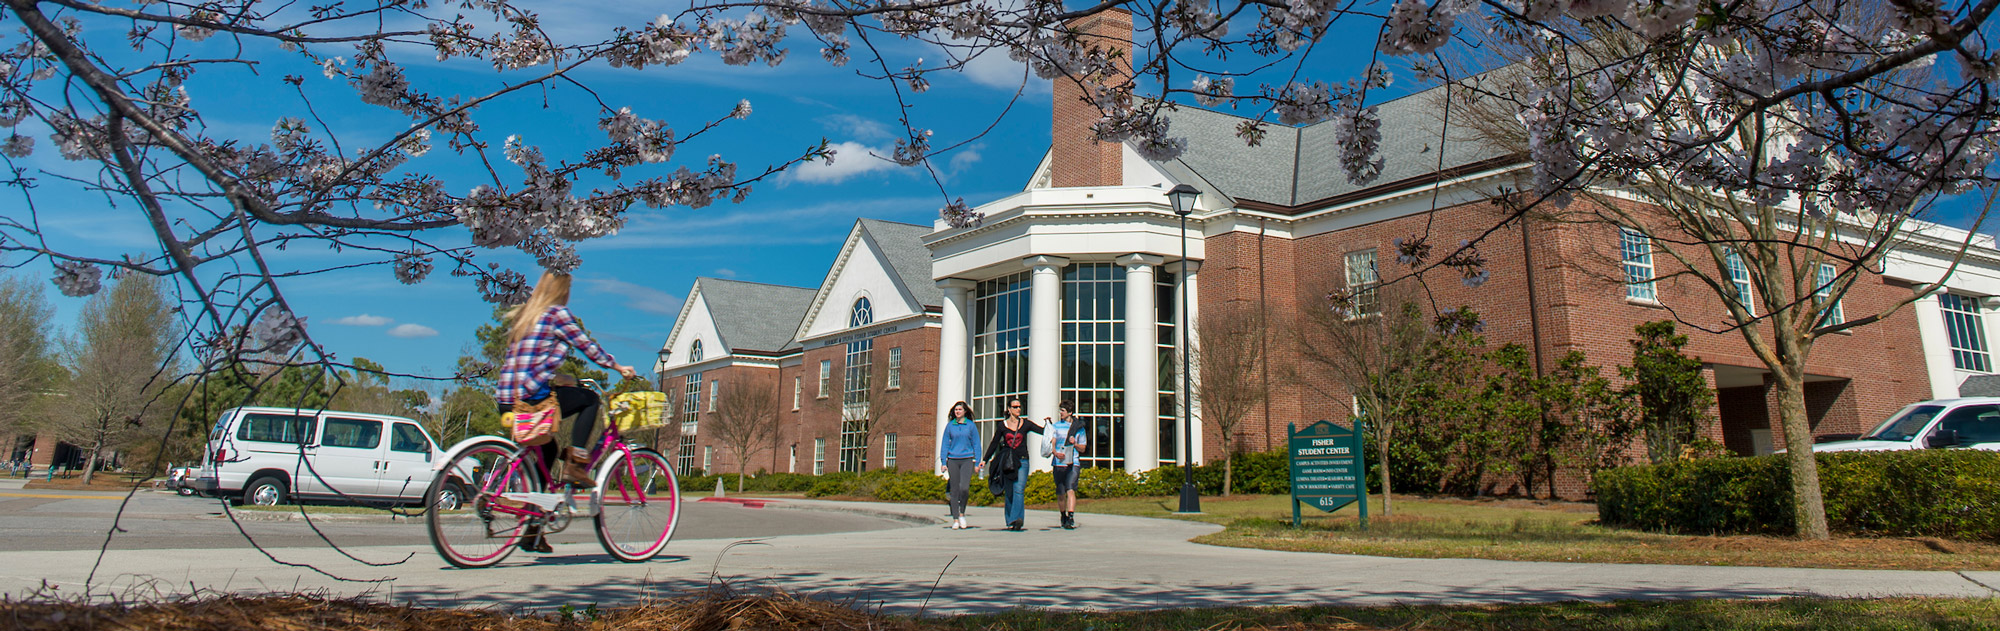 Trees begin to blossom ON UNCW campus during Spring semester 2015